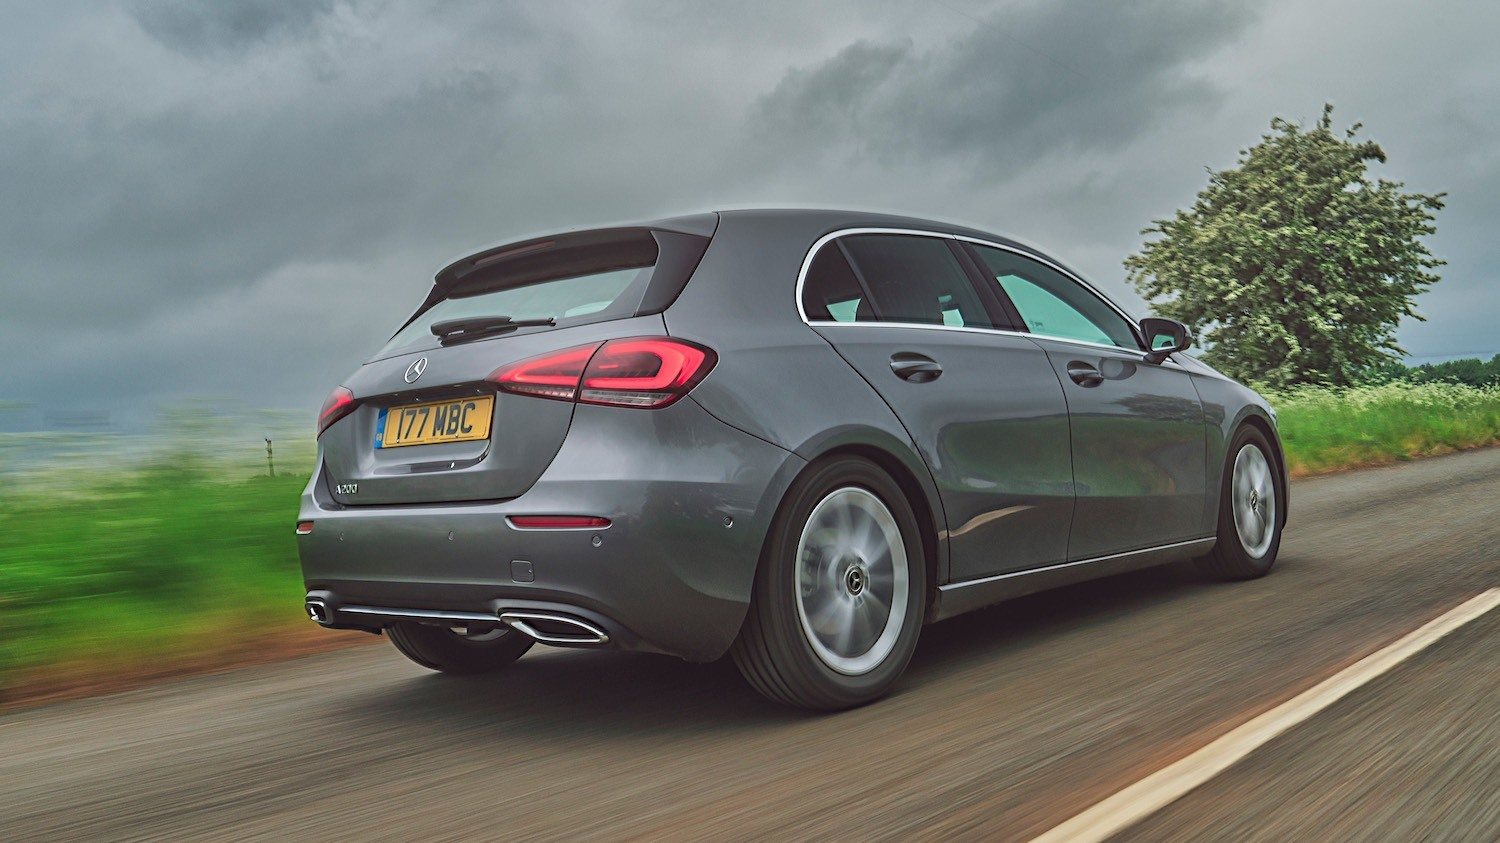 Tim Barnes-Clay reviews the New Mercedes-Benz A-Class 23